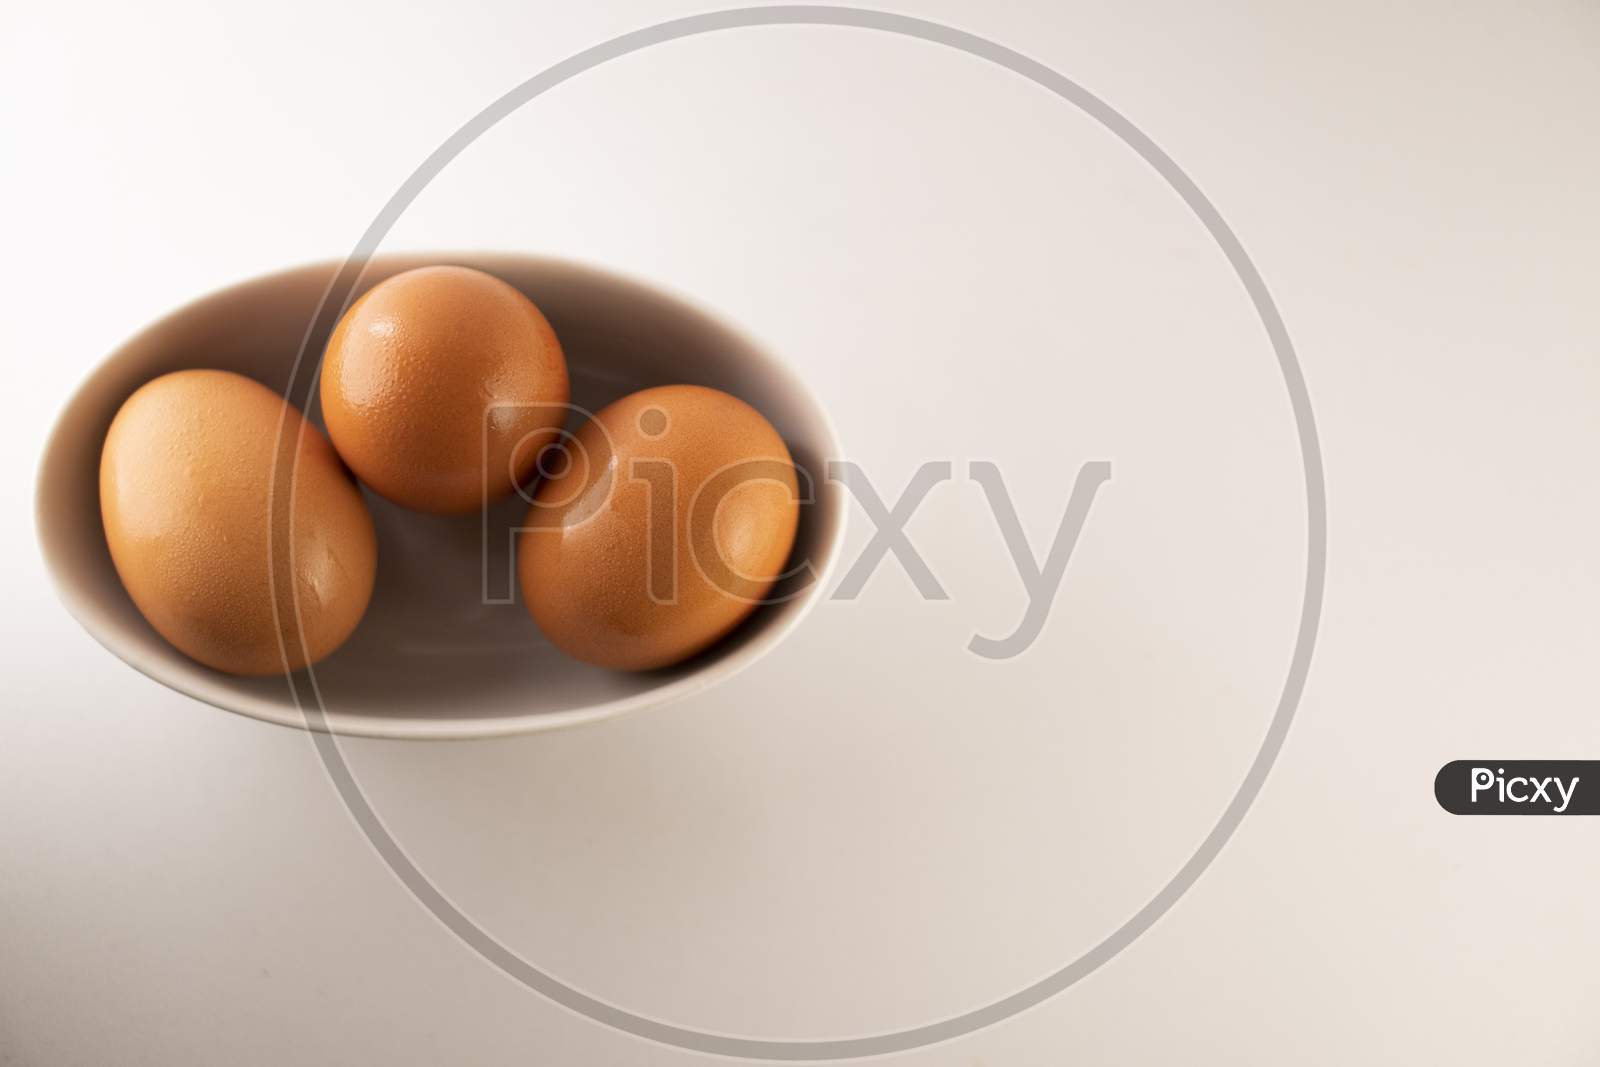 eggs in a bowl on a white background.